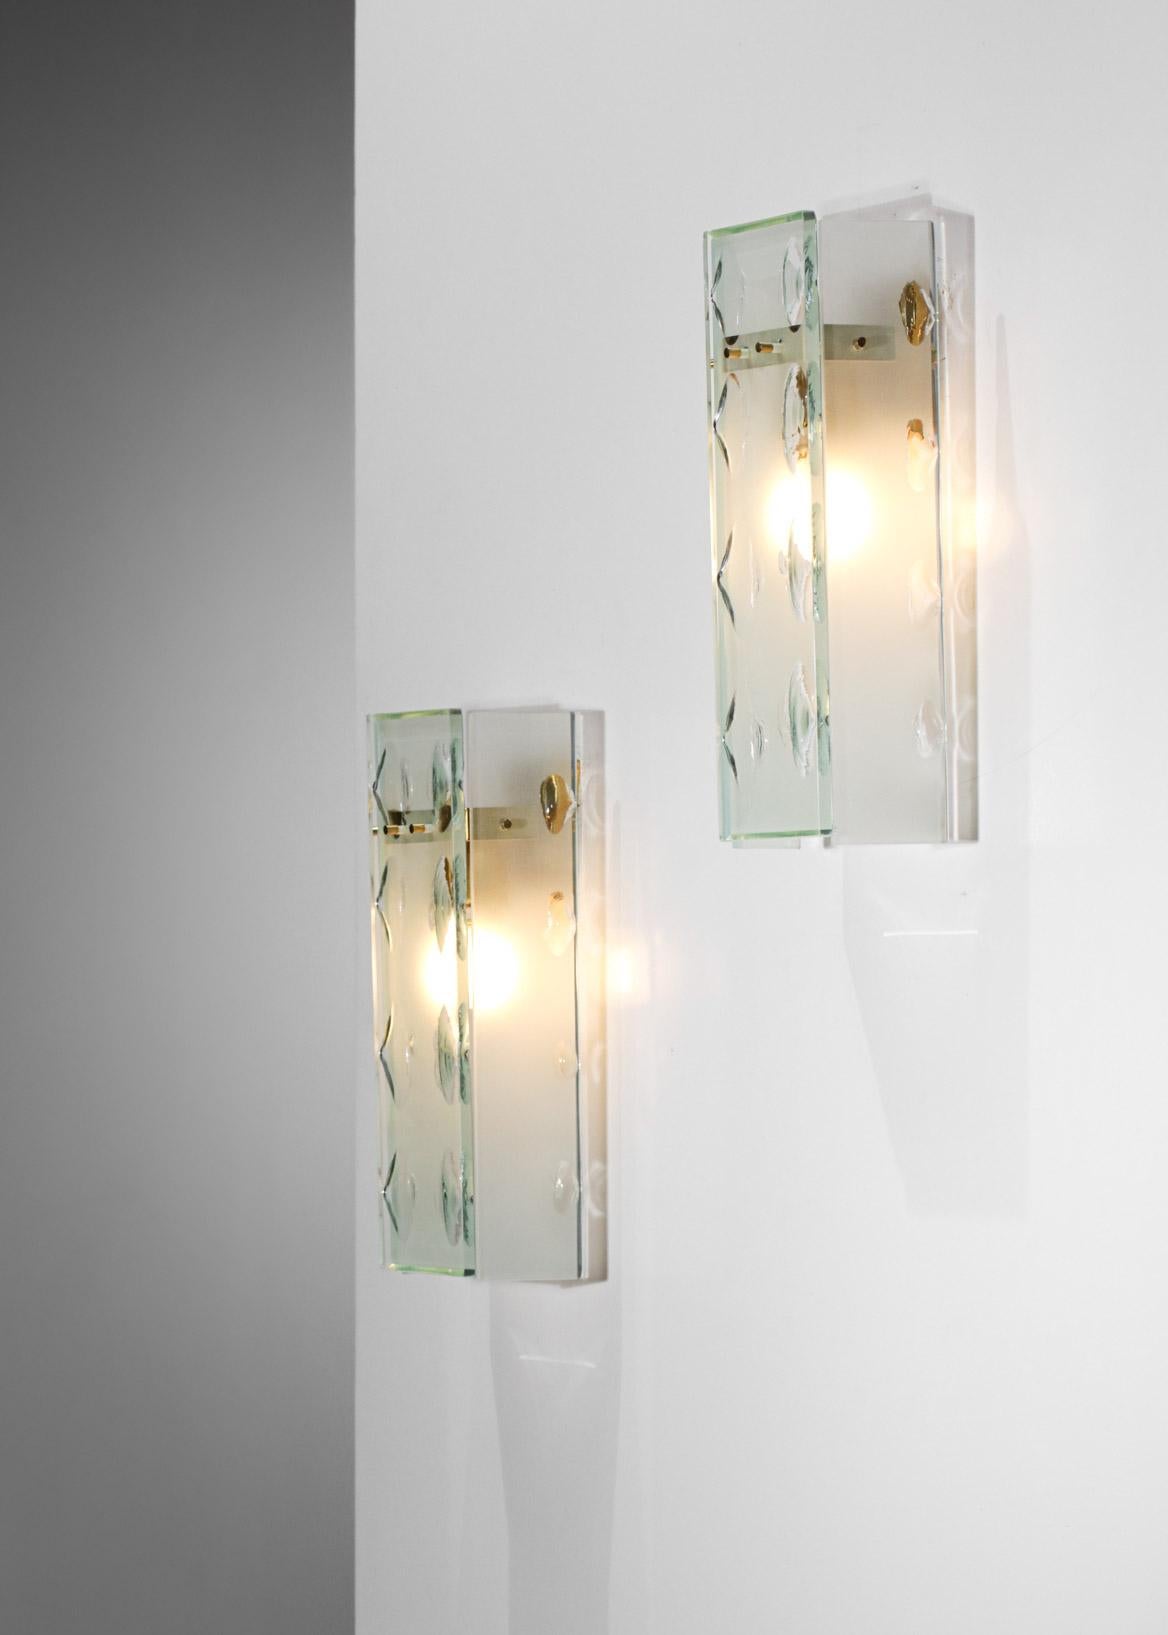 Mid-20th Century Pair of 3 Pane Frosted Glass Sconces Max Ingrand Style Fontana Arte Attrib- G100 For Sale